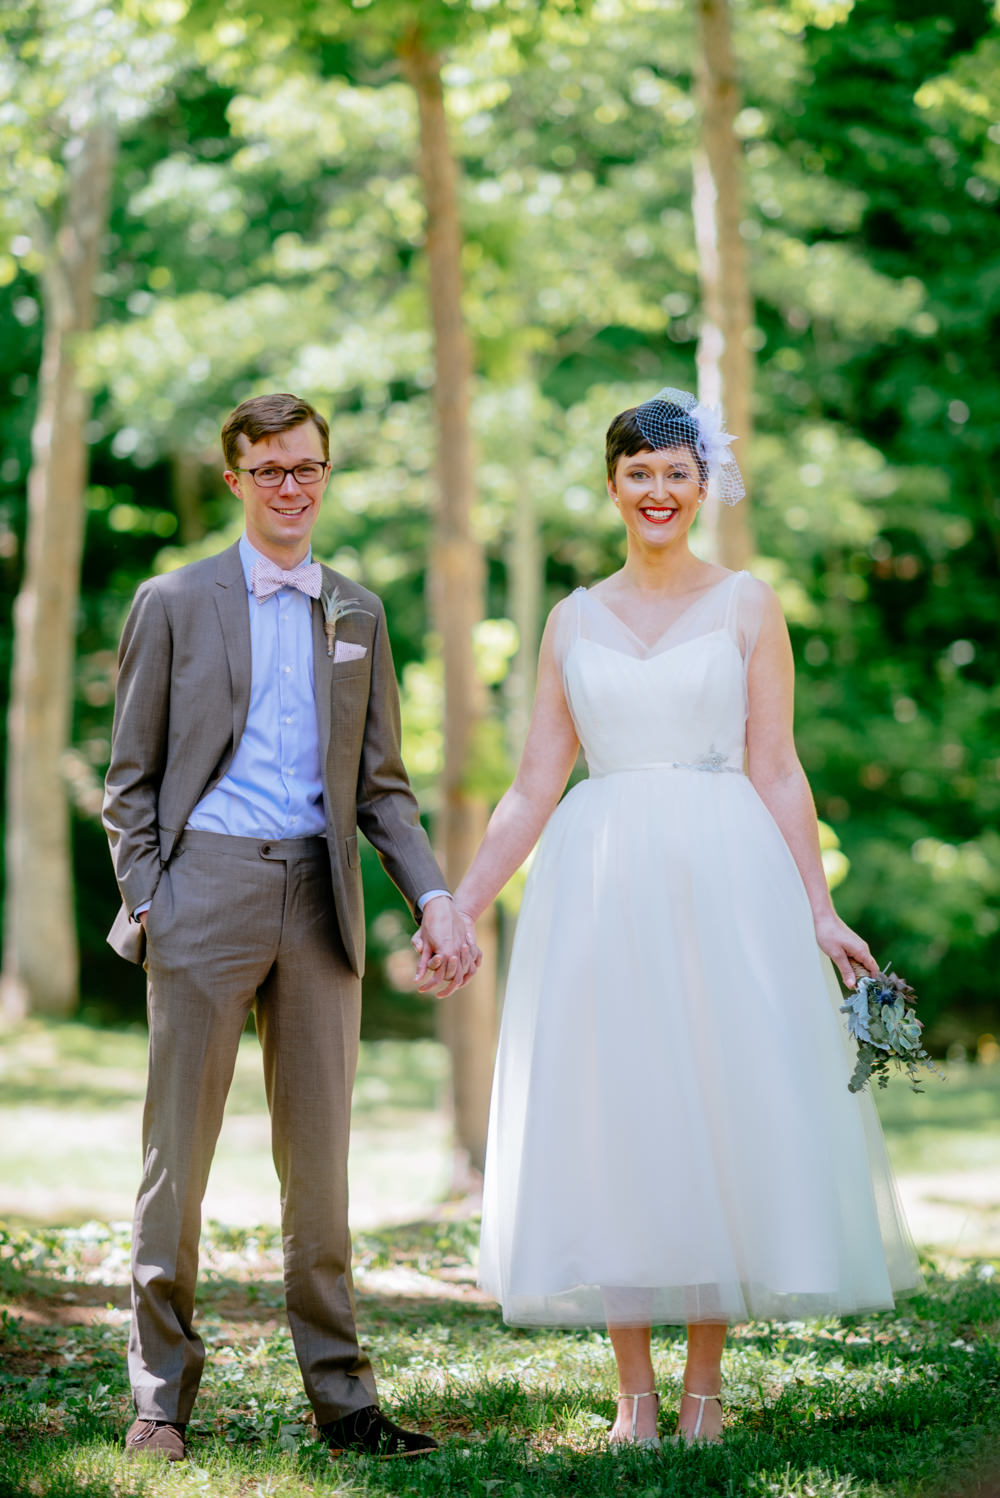 adorable bride and groom camp muffly wv wedding